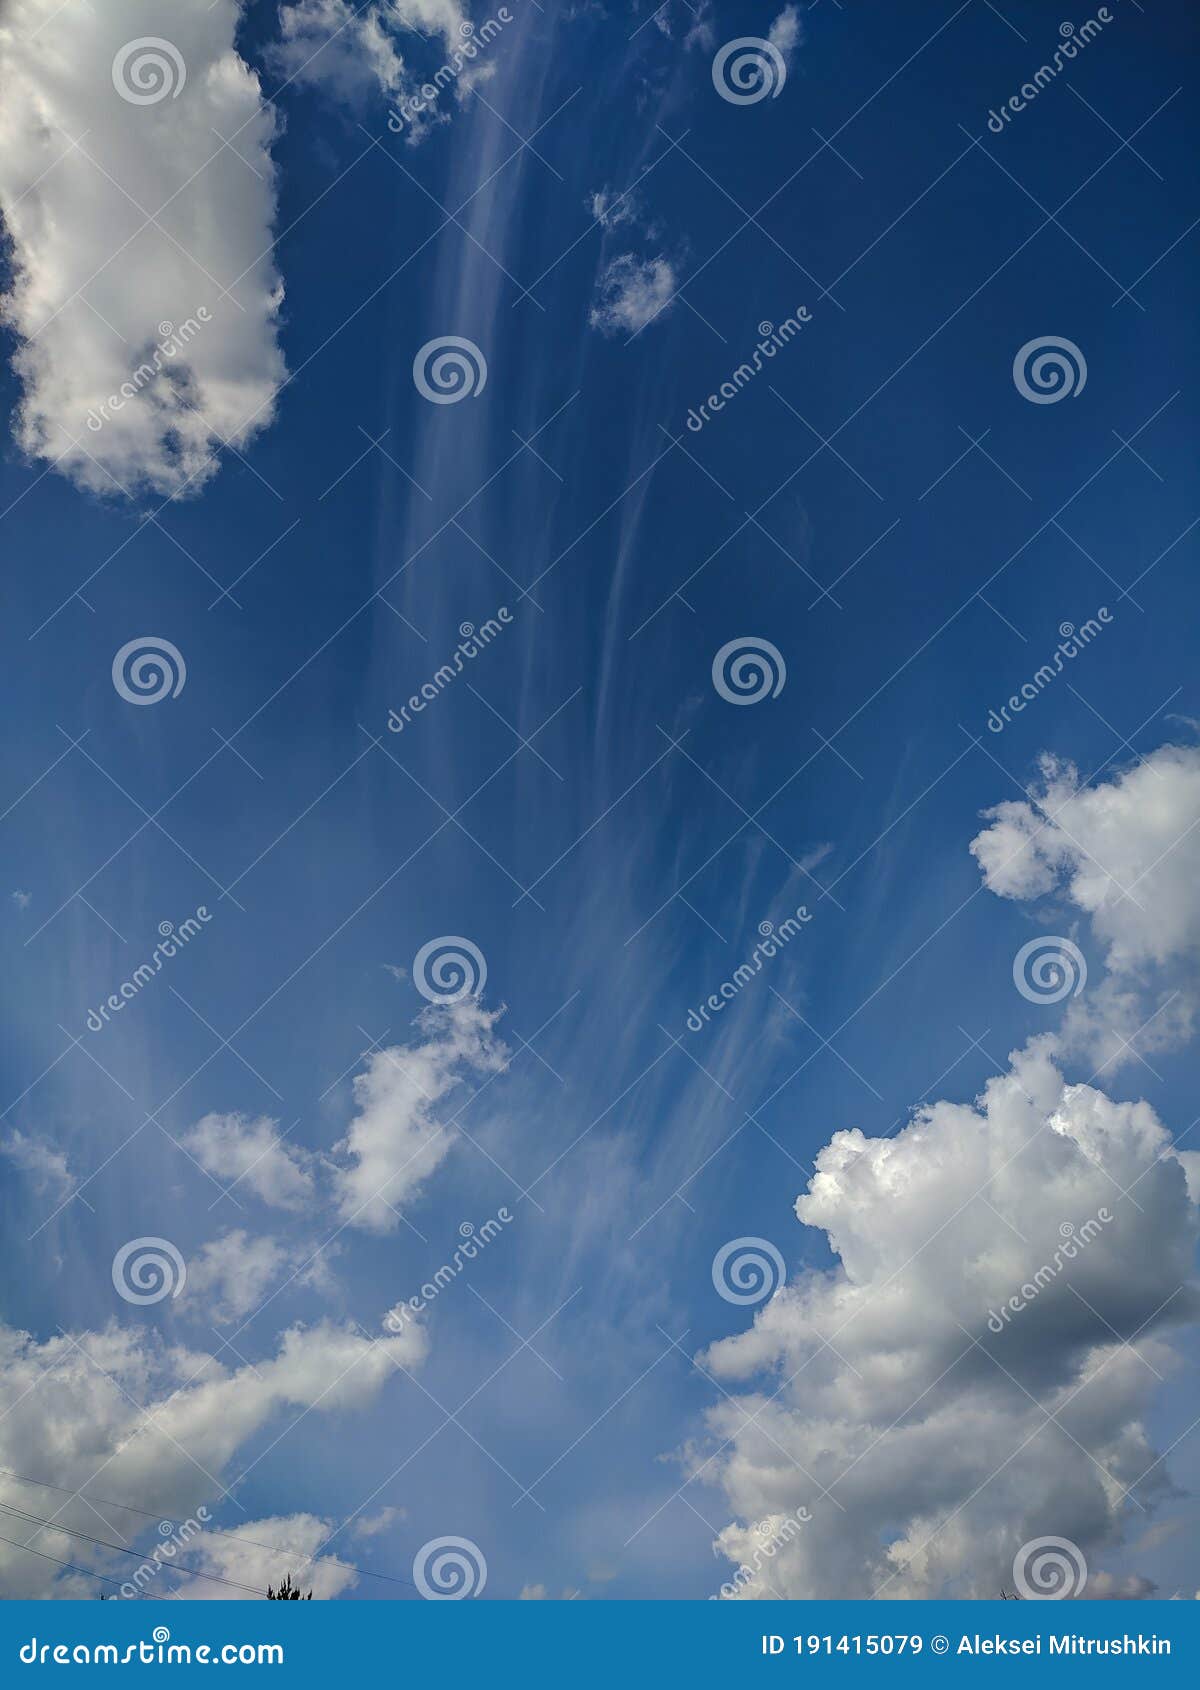 Noyabrsk, Russia - May 30, 2020: Blue Sky with White Clouds. Vertical